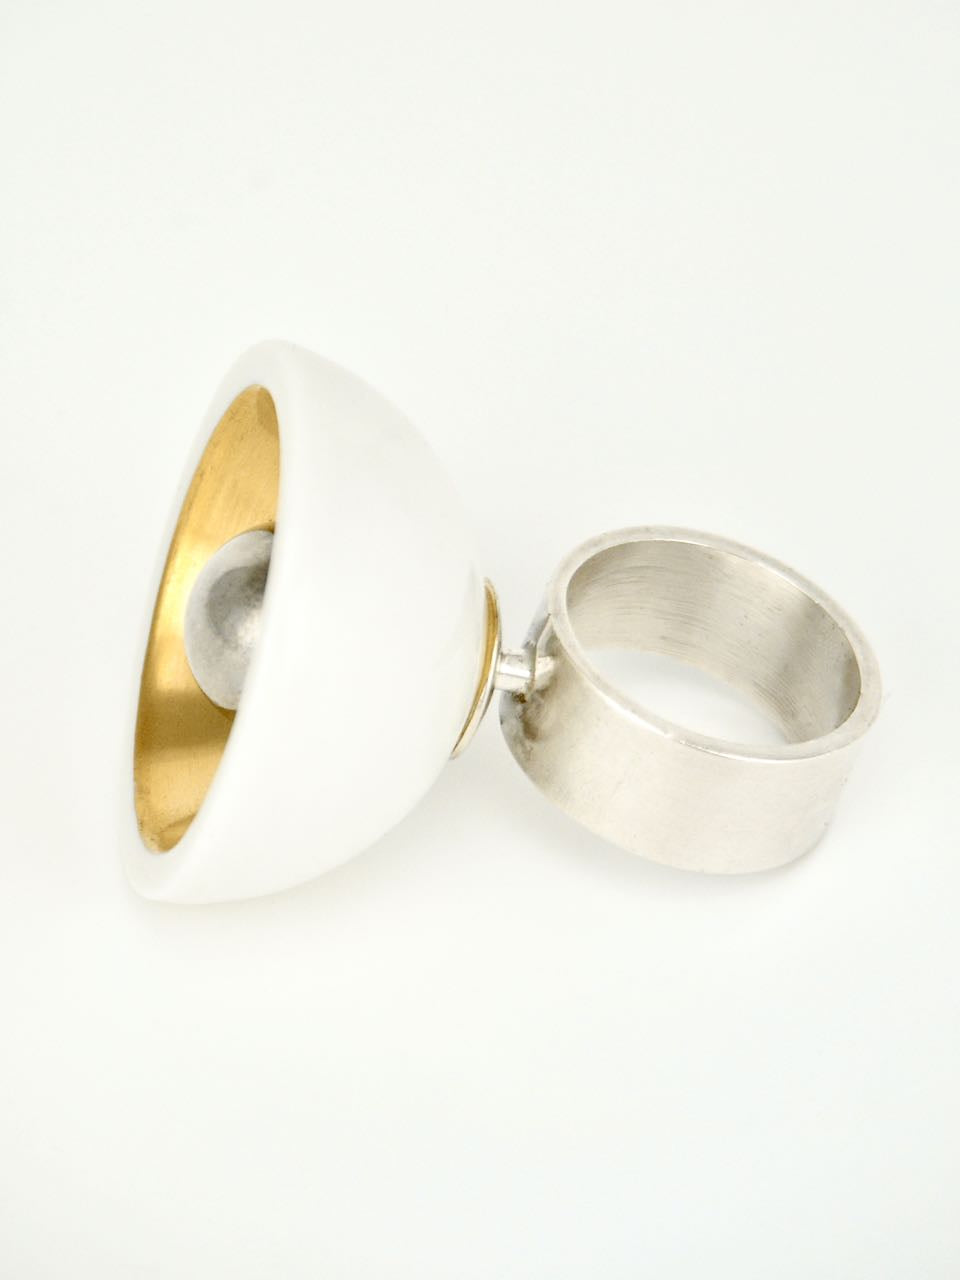 Anton Michelsen Silver and Gilded Porcelain Dish and Ball Ring 1970s